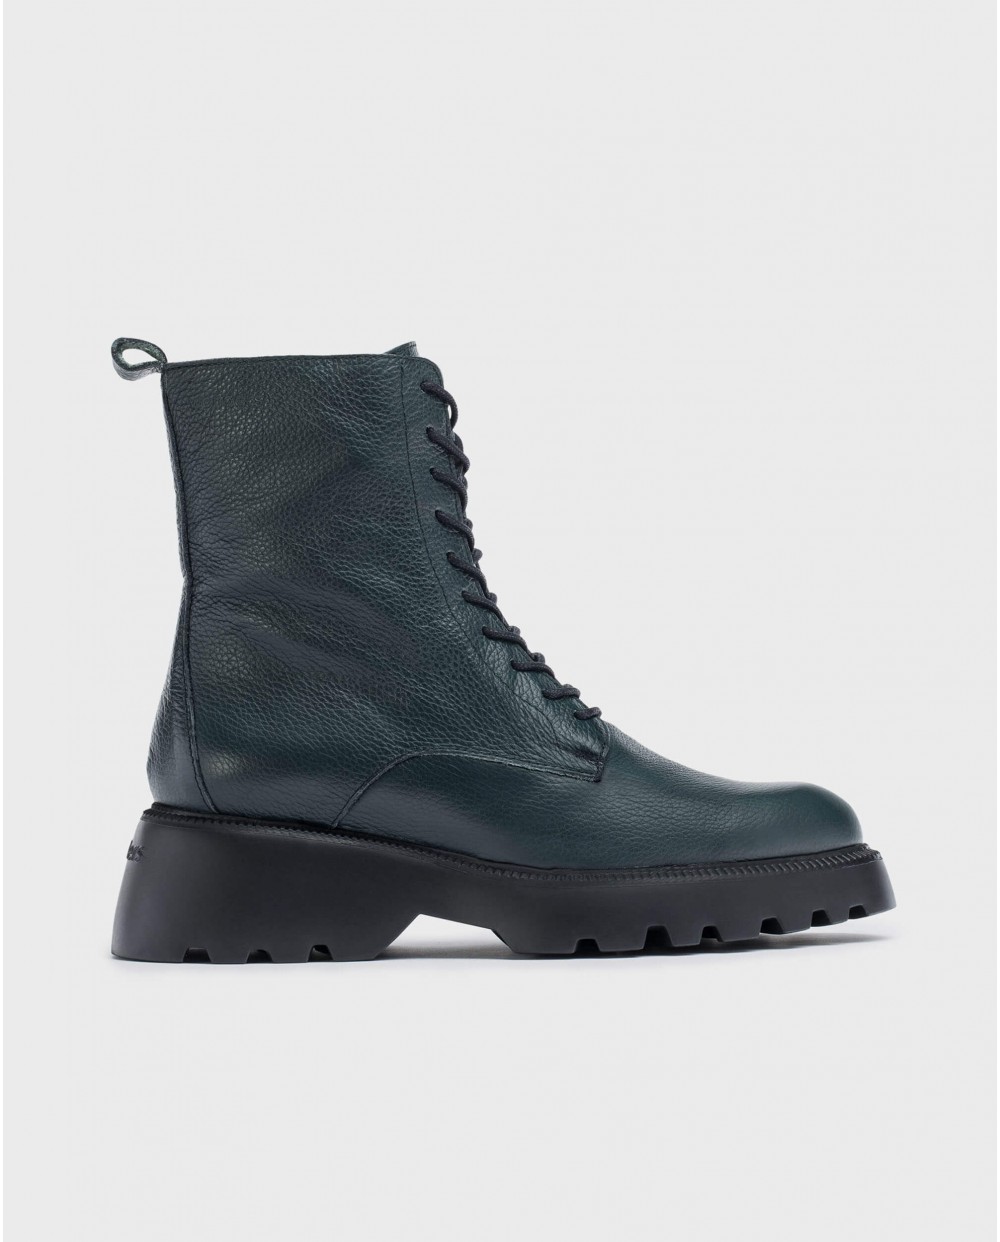 Green leather ATARI ankle boot